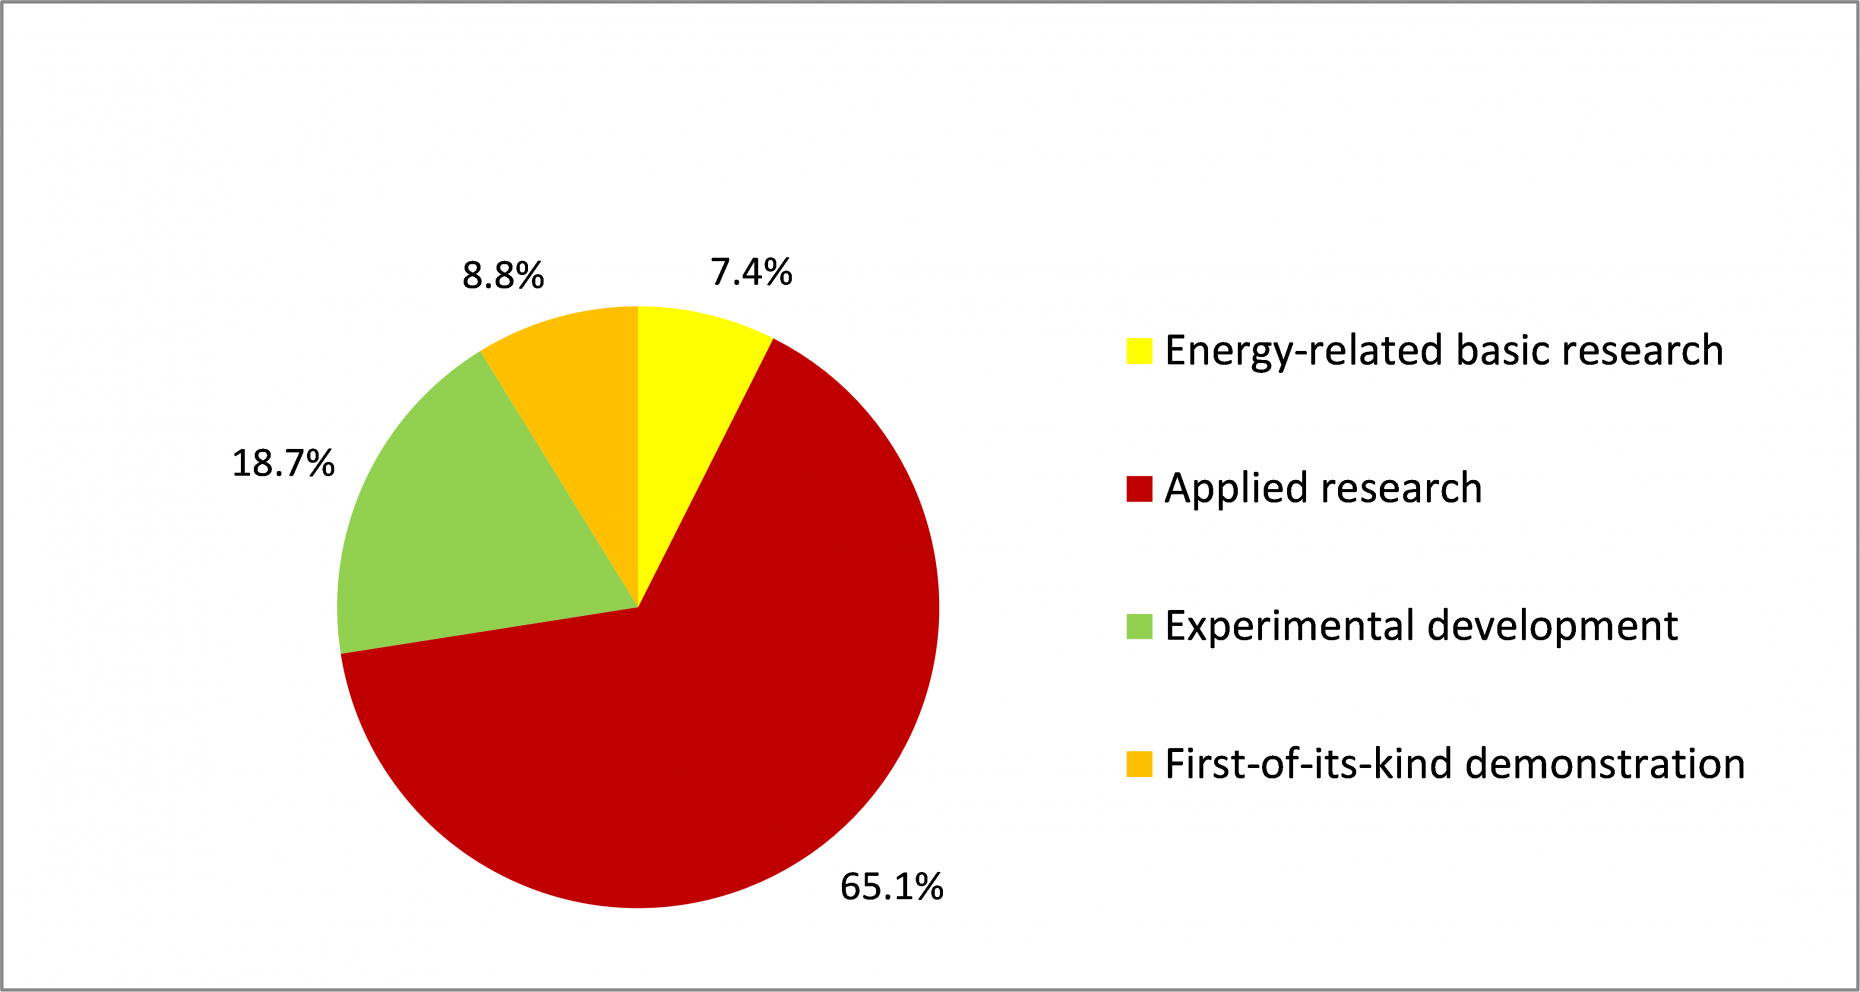 Expenditures 2020 in total by type of research